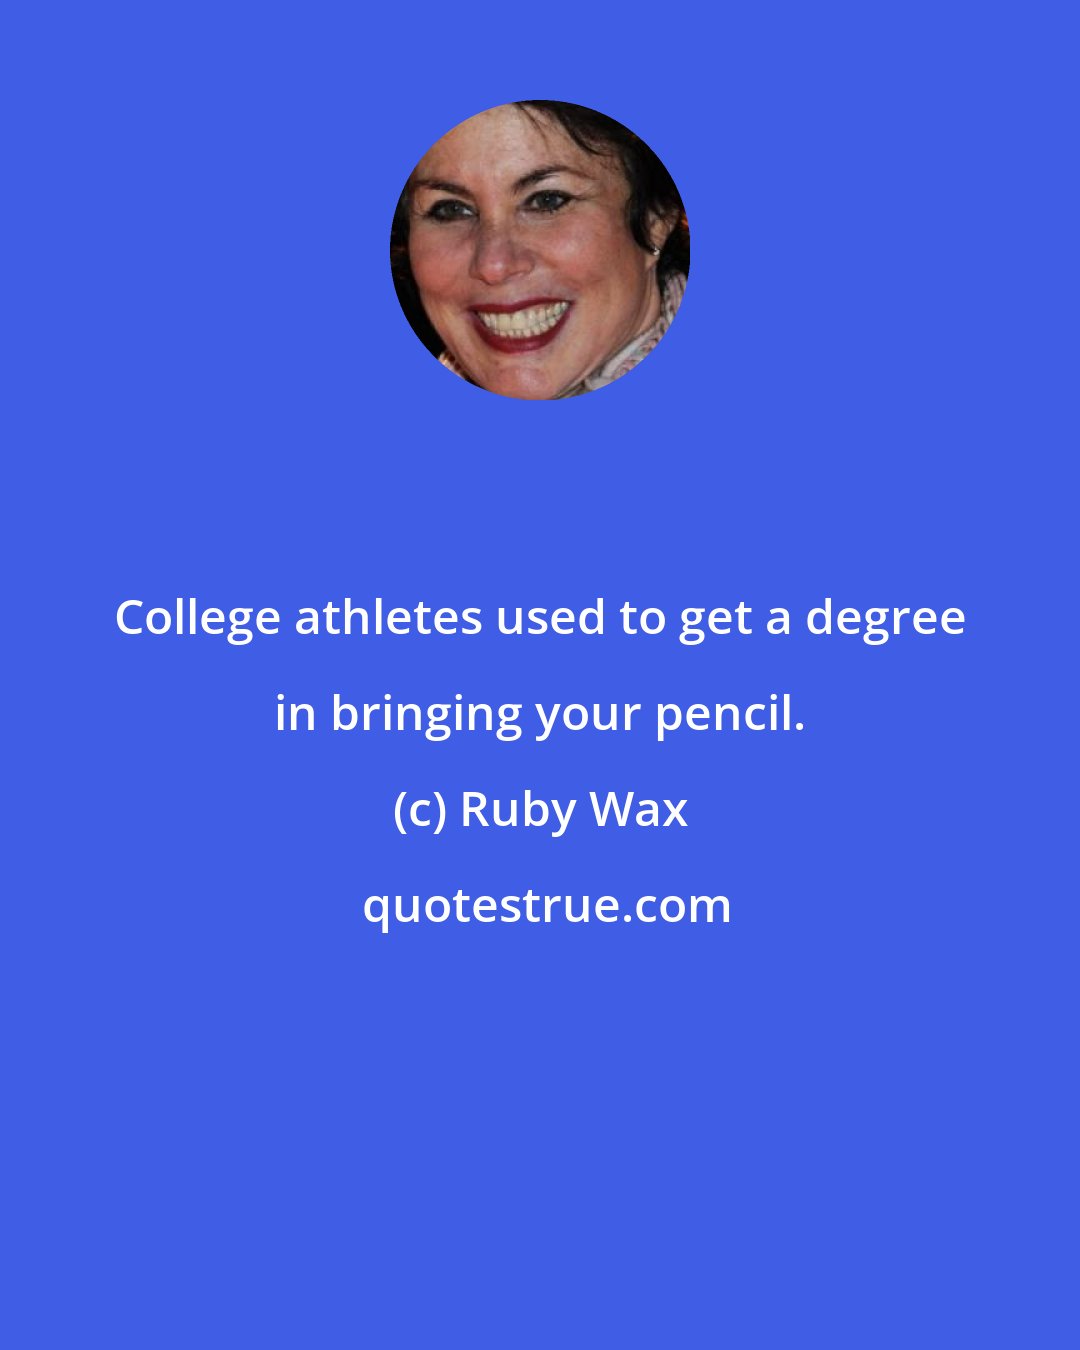 Ruby Wax: College athletes used to get a degree in bringing your pencil.